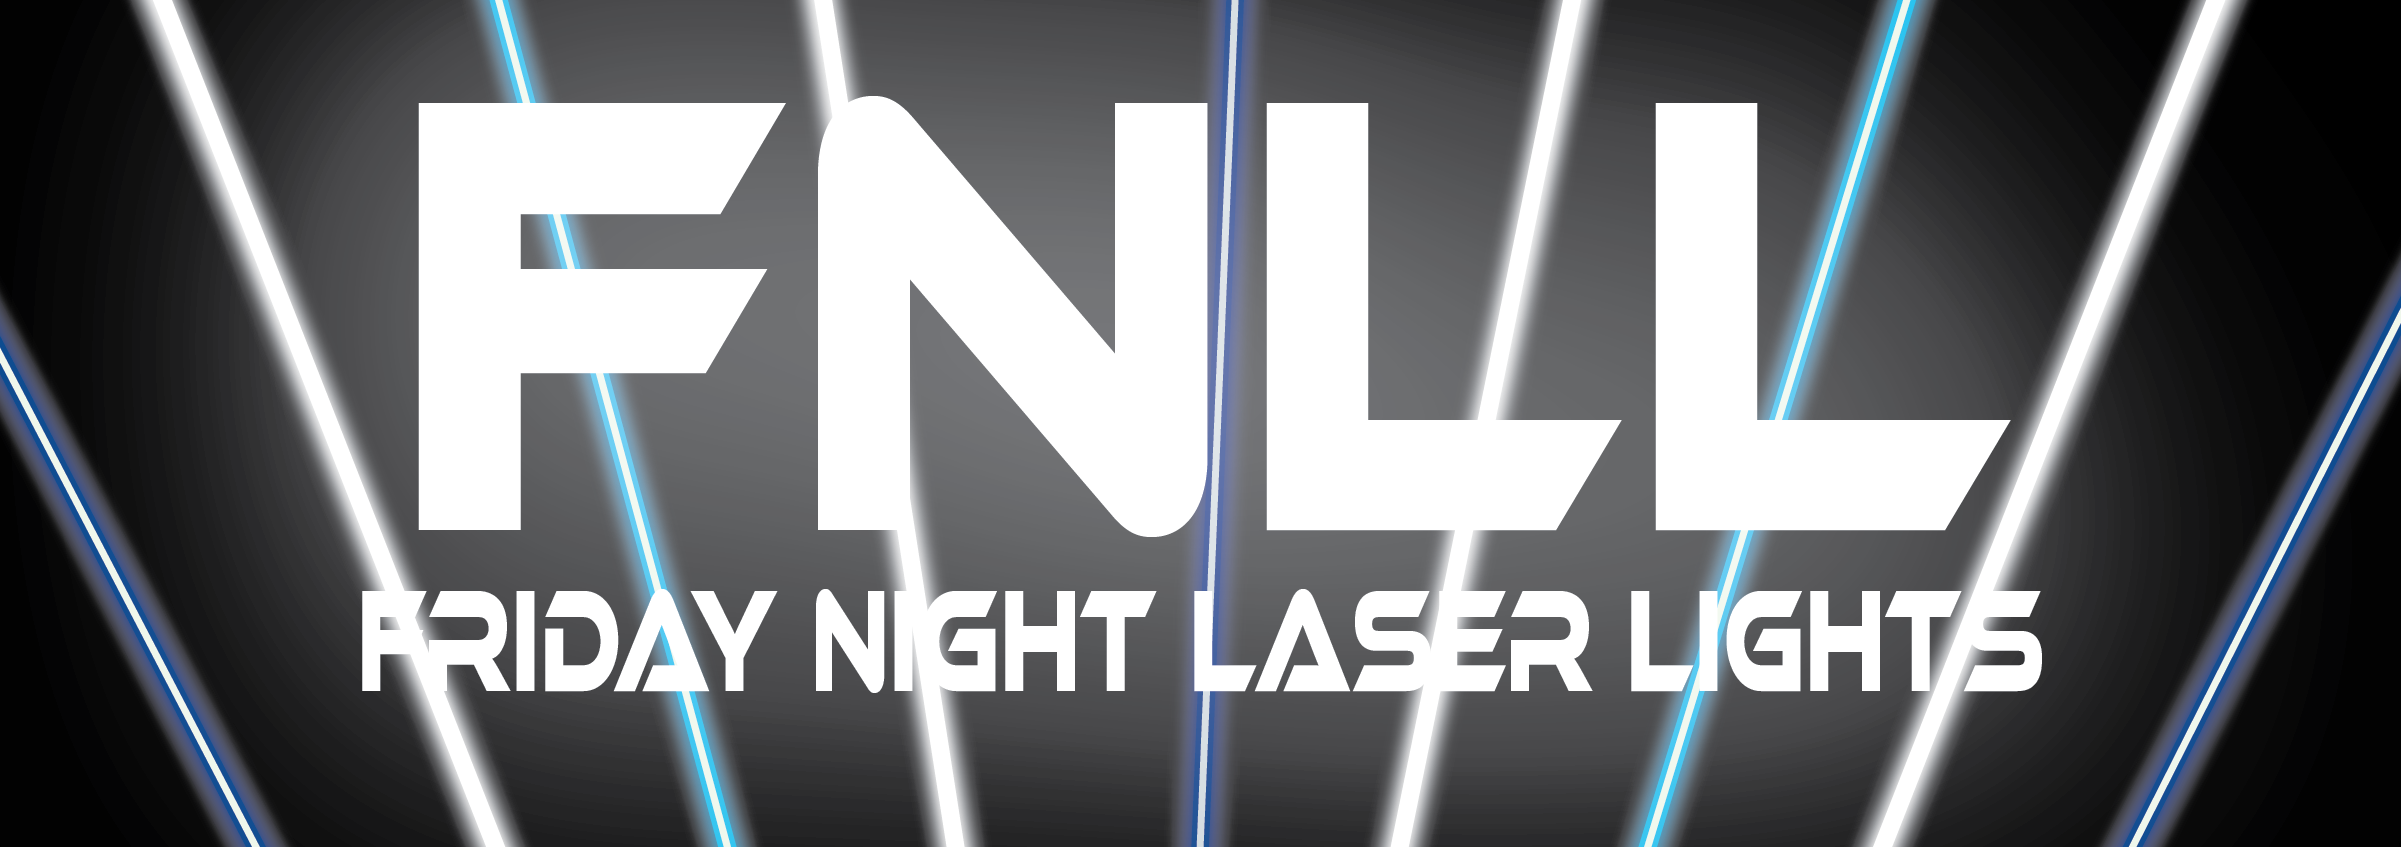 Giant white letter that read"FNLL Friday Night Laser Lights" on a black background with blue and white laser beams.